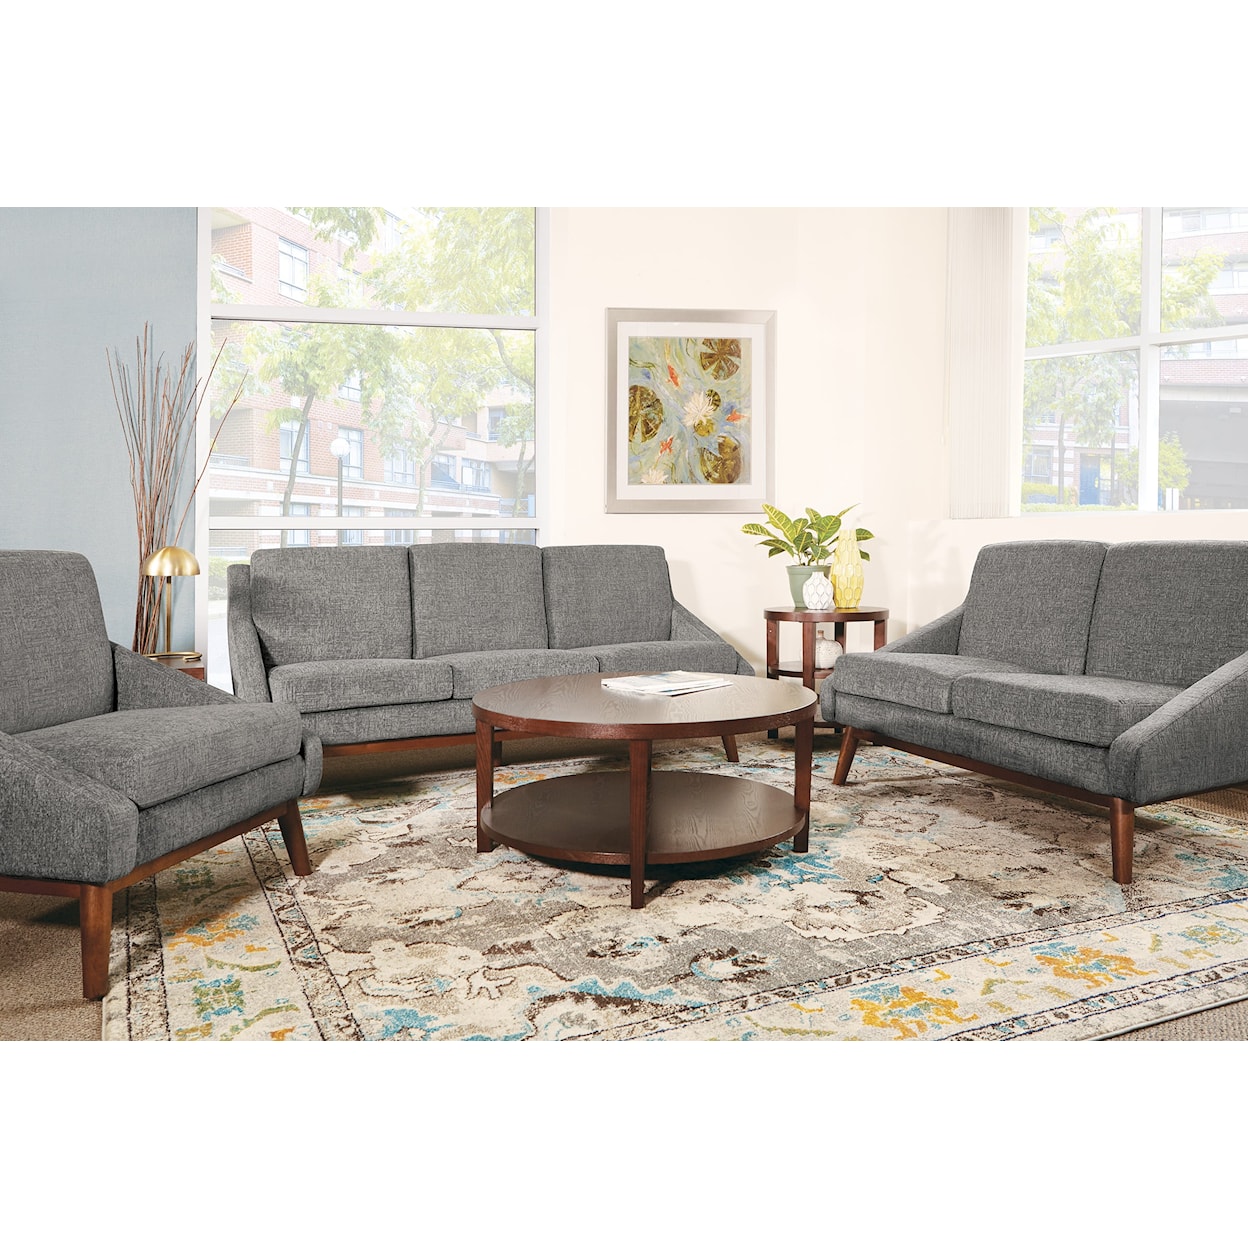 Office Star Lounge Seating/Davenport Chair